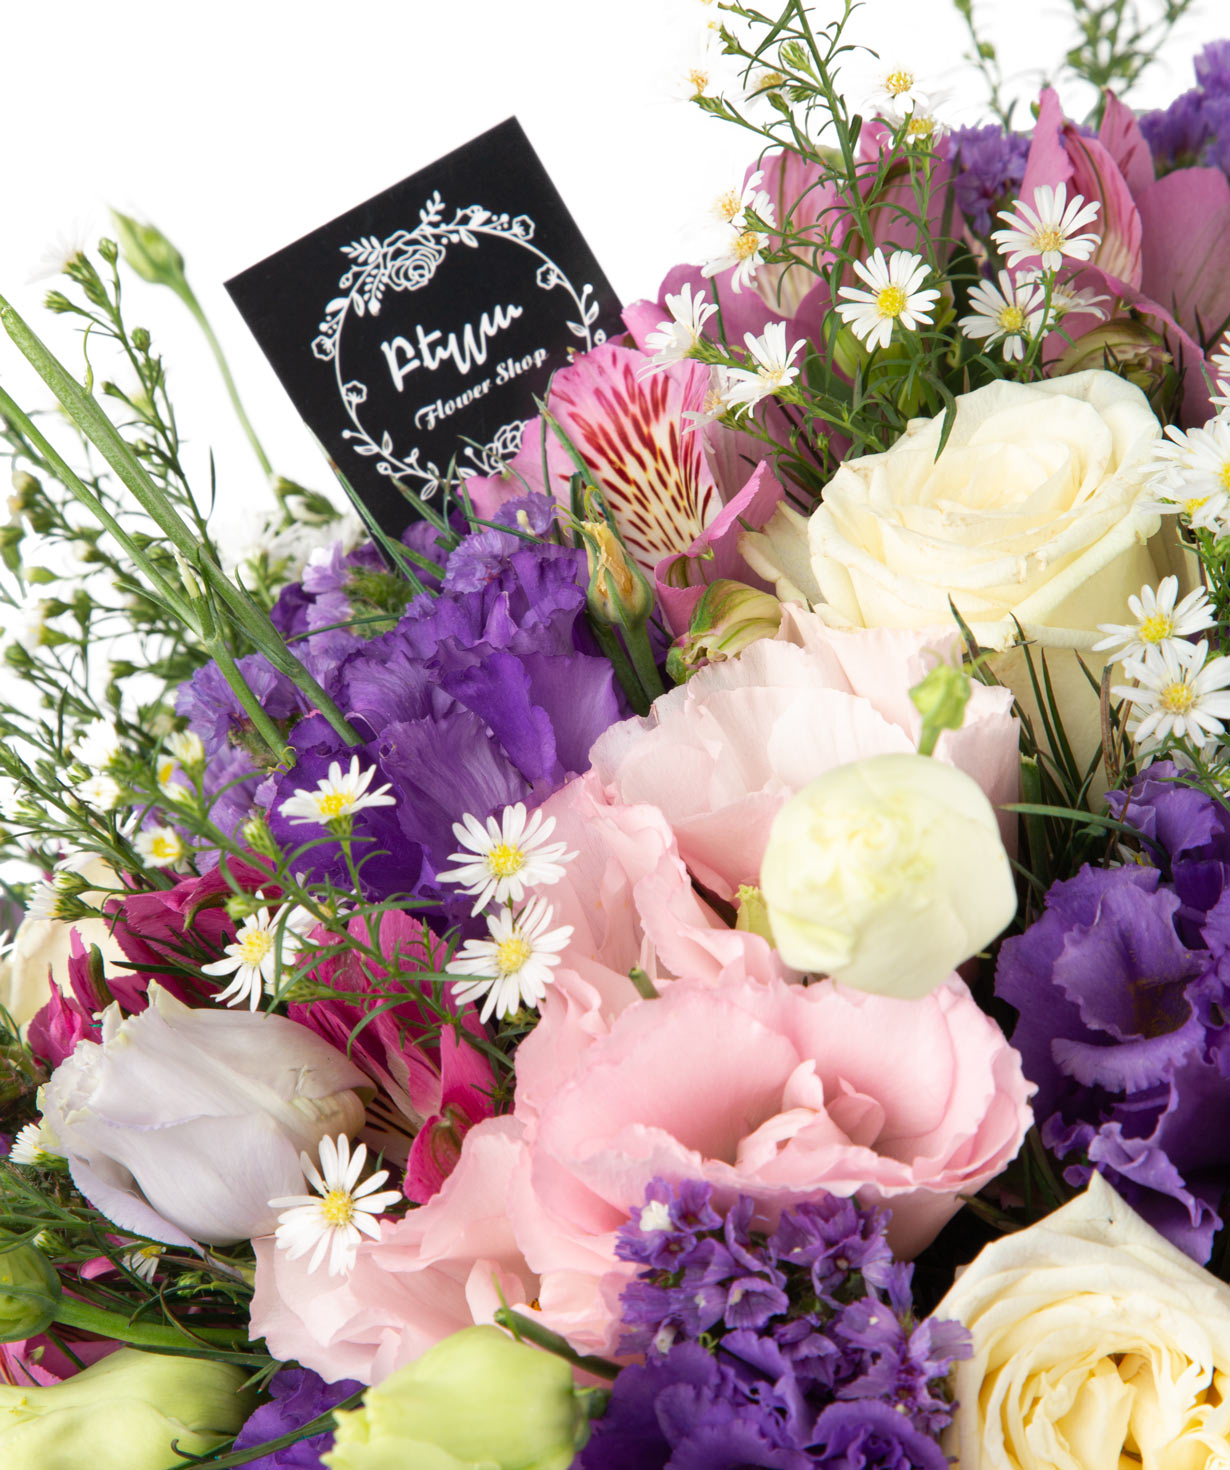 Bouquet `Dublin` with roses, lisianthus and alstroemerias